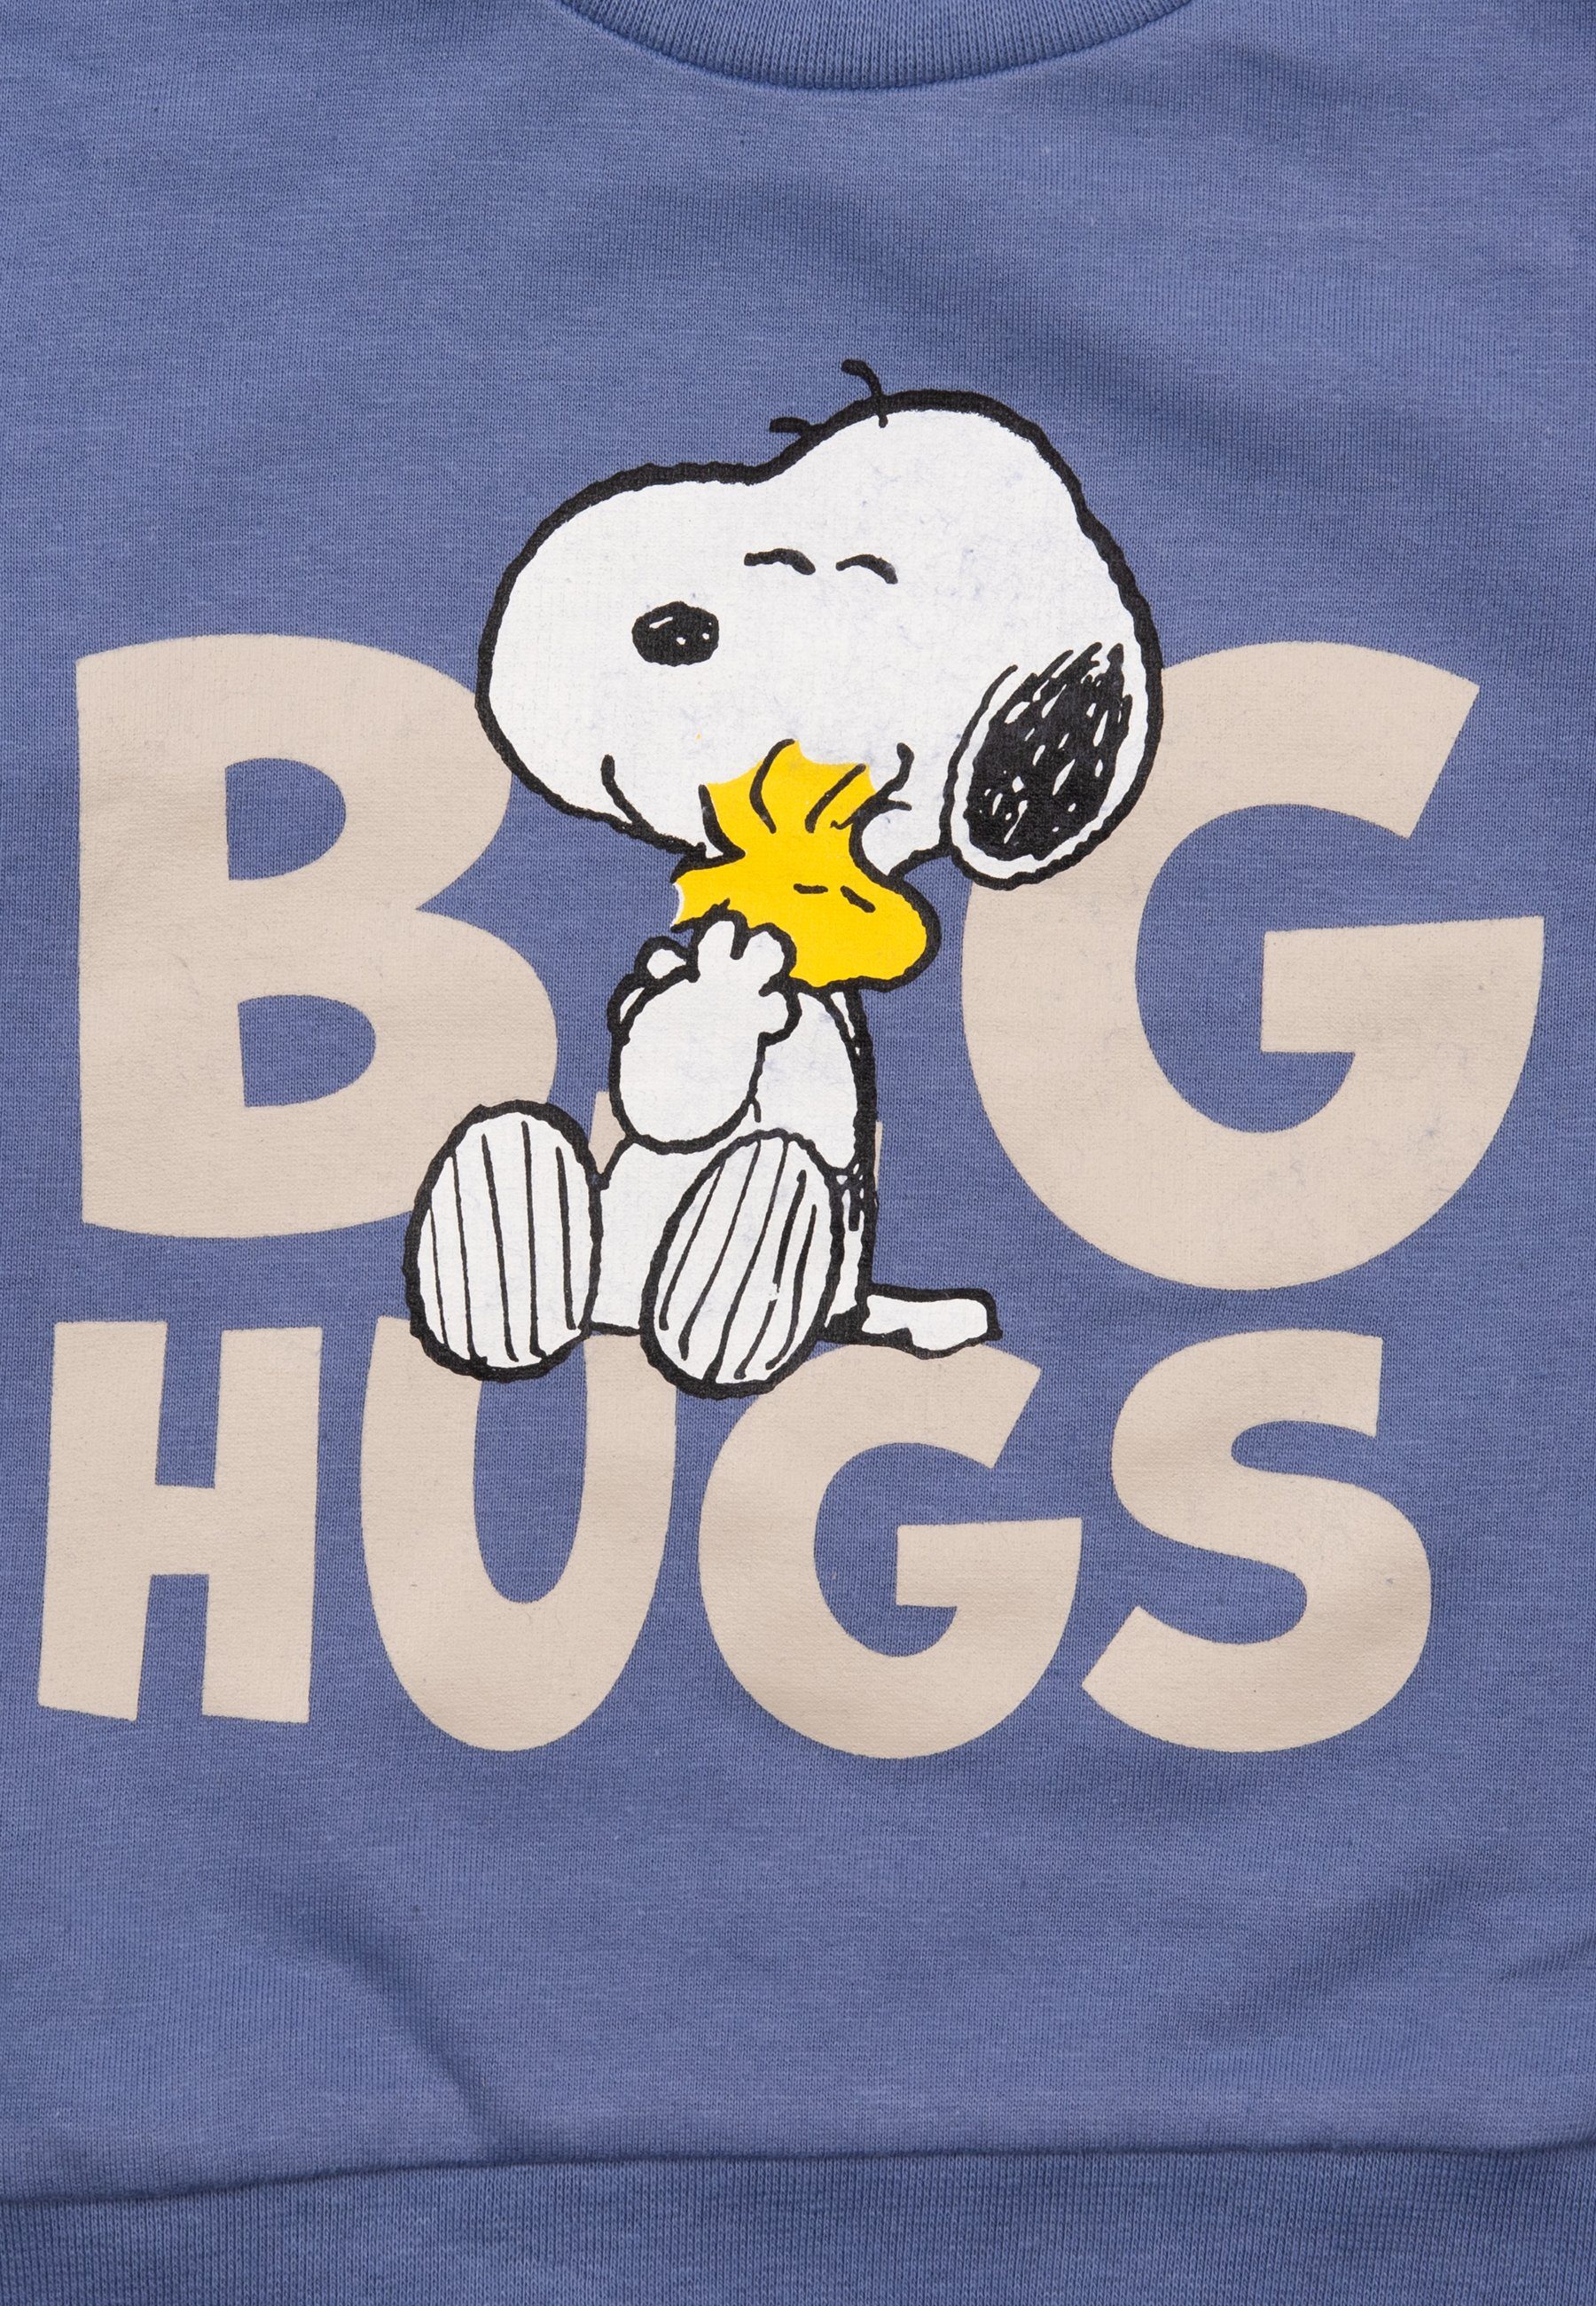 mit Set Pullover Hugs - Snoopy United Hose Peanuts Hose Rosa & Baby The Big Lila Shirt Labels®